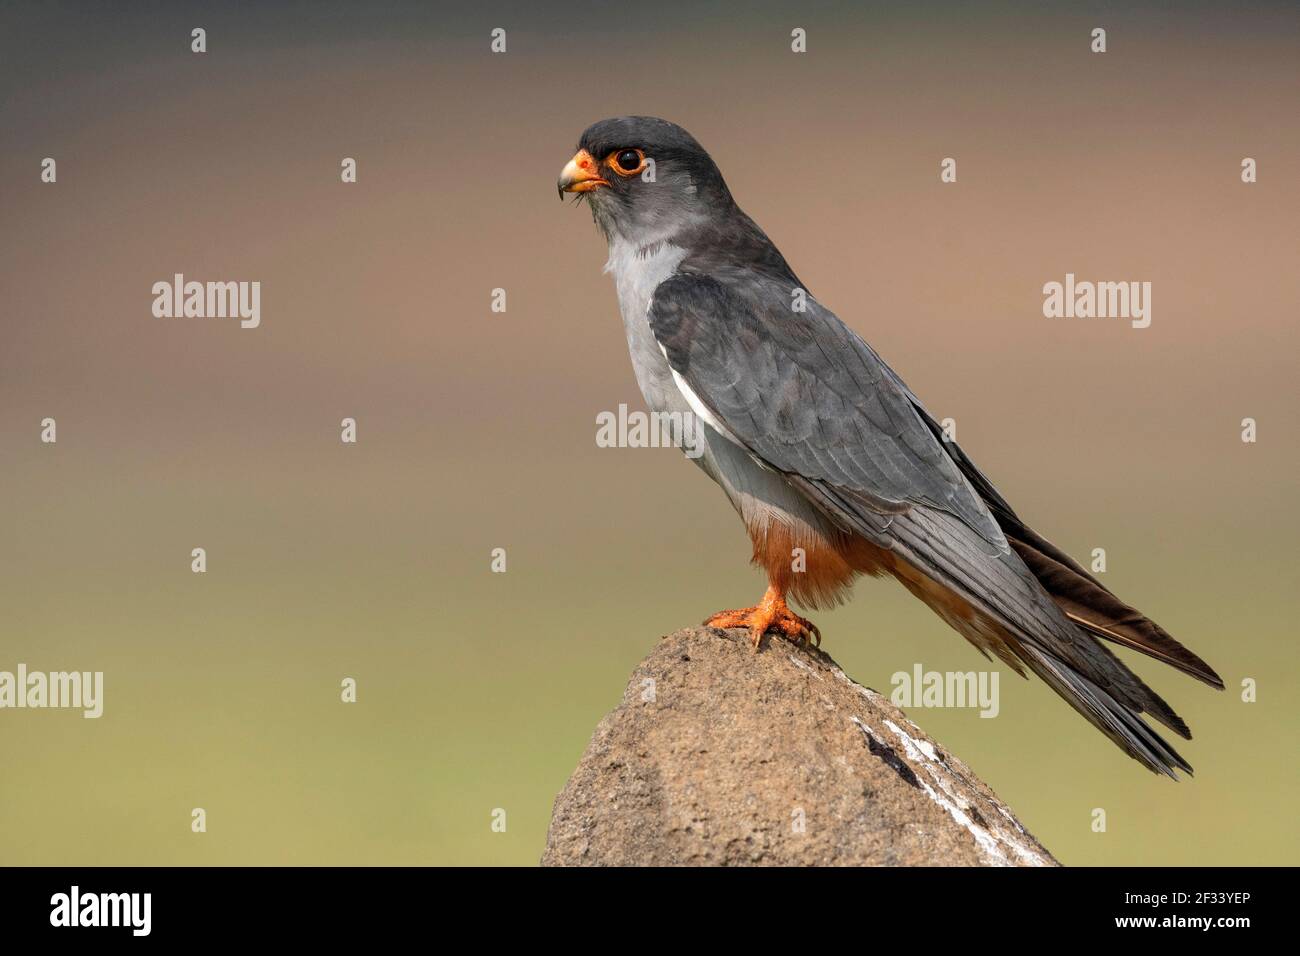 Amur Falcon, Male, Pune. Small falcon is sooty gray with rufous-orange thighs and vent. Stock Photo